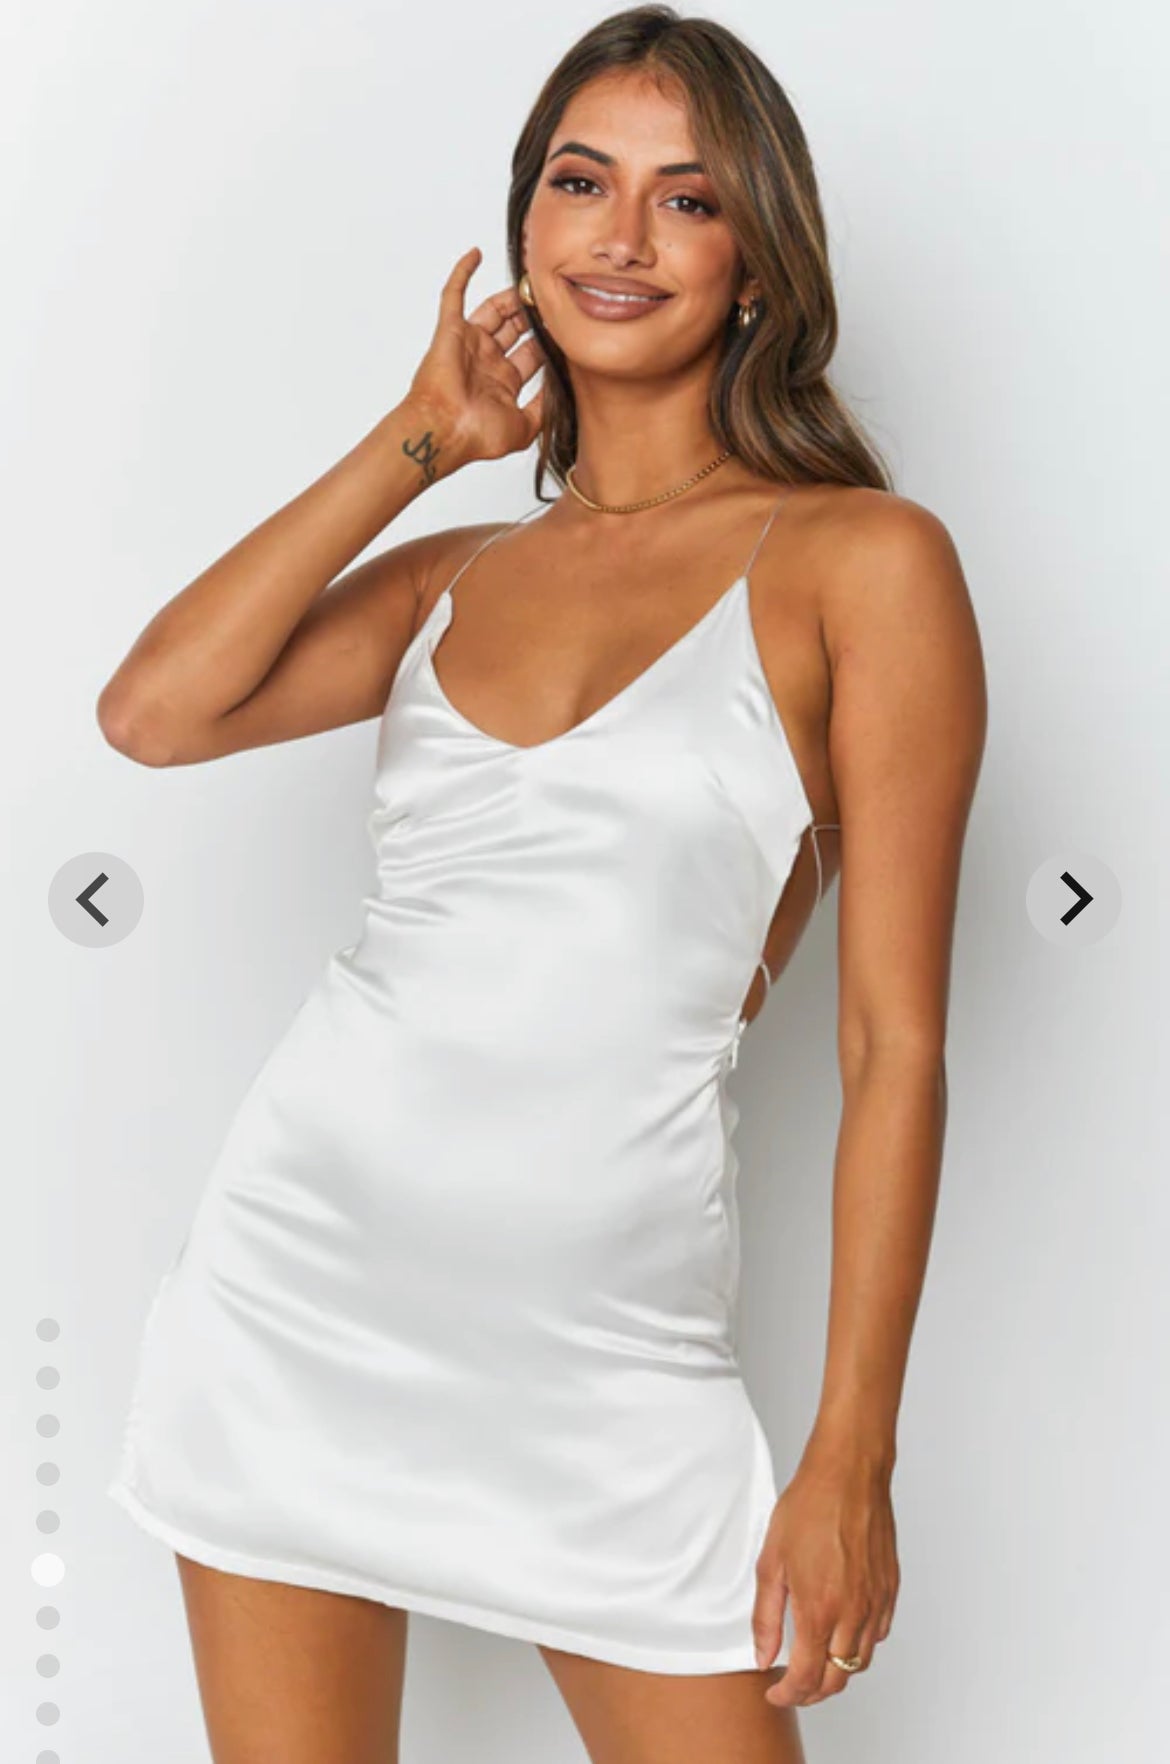 satin white mini dress for clubbing or party with tie up back and v neck . short dress. girl smiling 